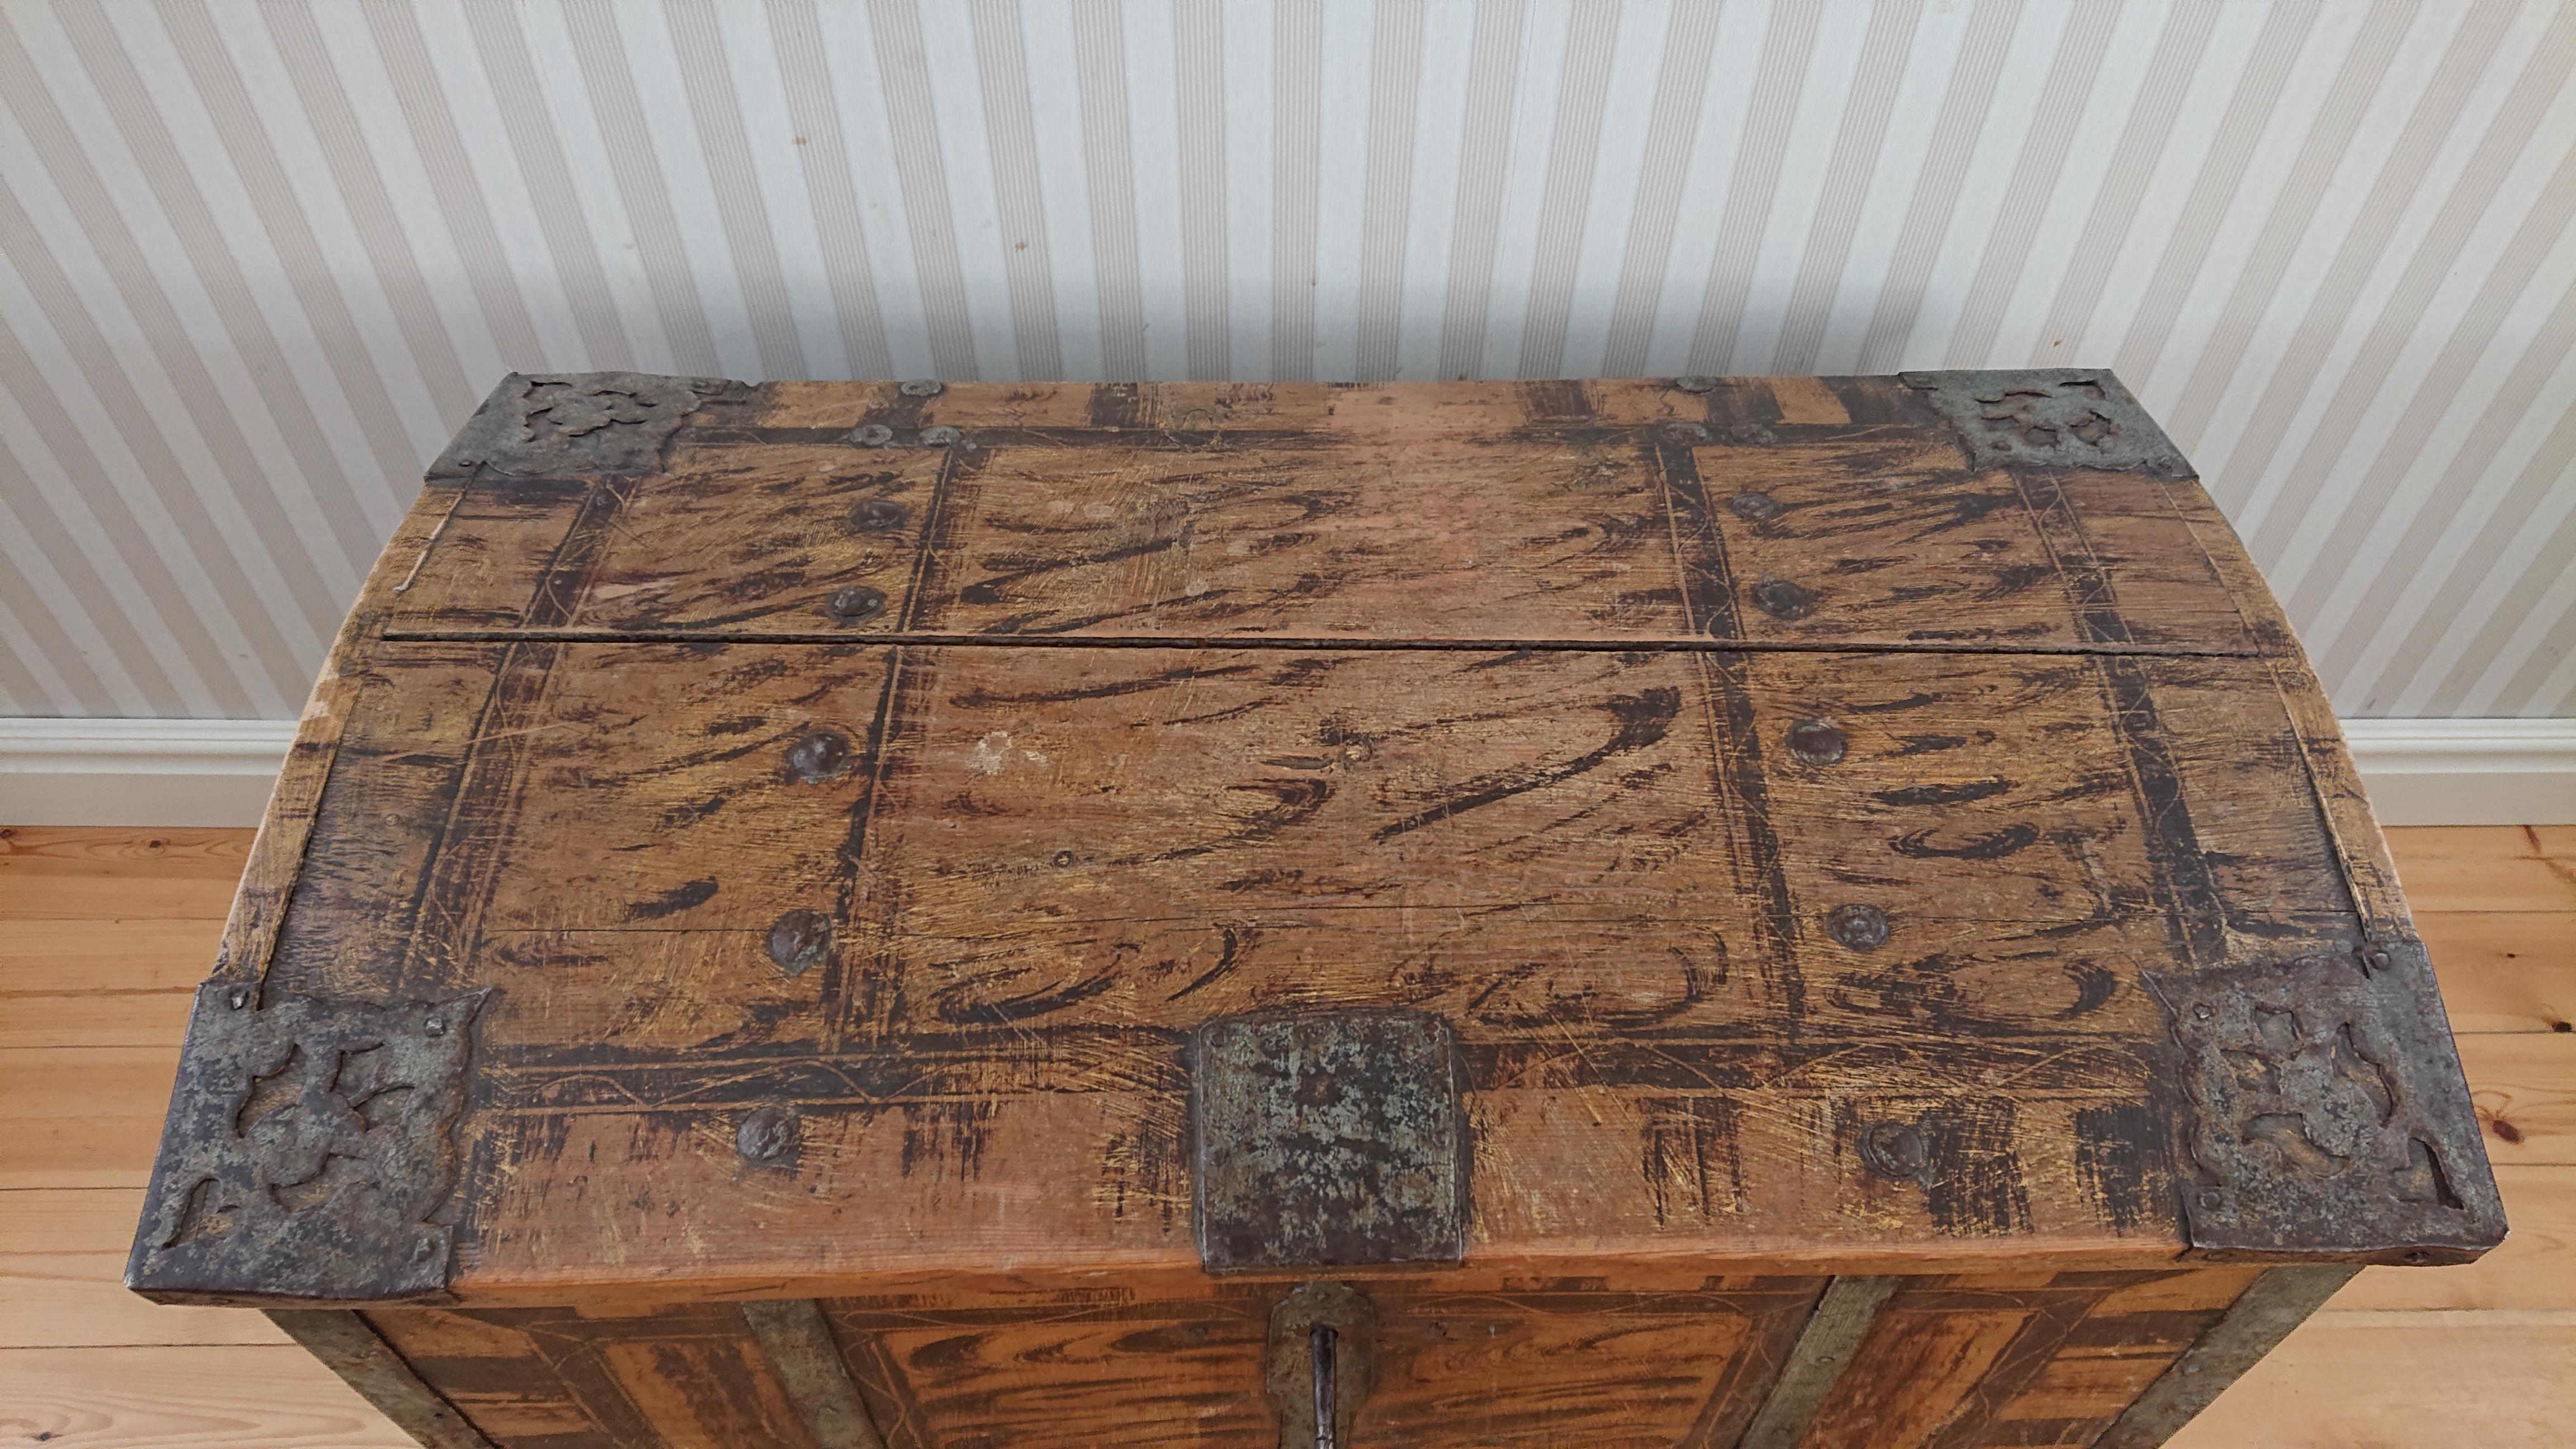 18th Century Swedish antique rustique Chest from Boden Norrbotten, Northern Sweden.
The chest has untouched original paint.
The trunk was dated 1799 to celebrate a birthday ,and the name of the honoree are painted on the mid of the lid inside.
Such